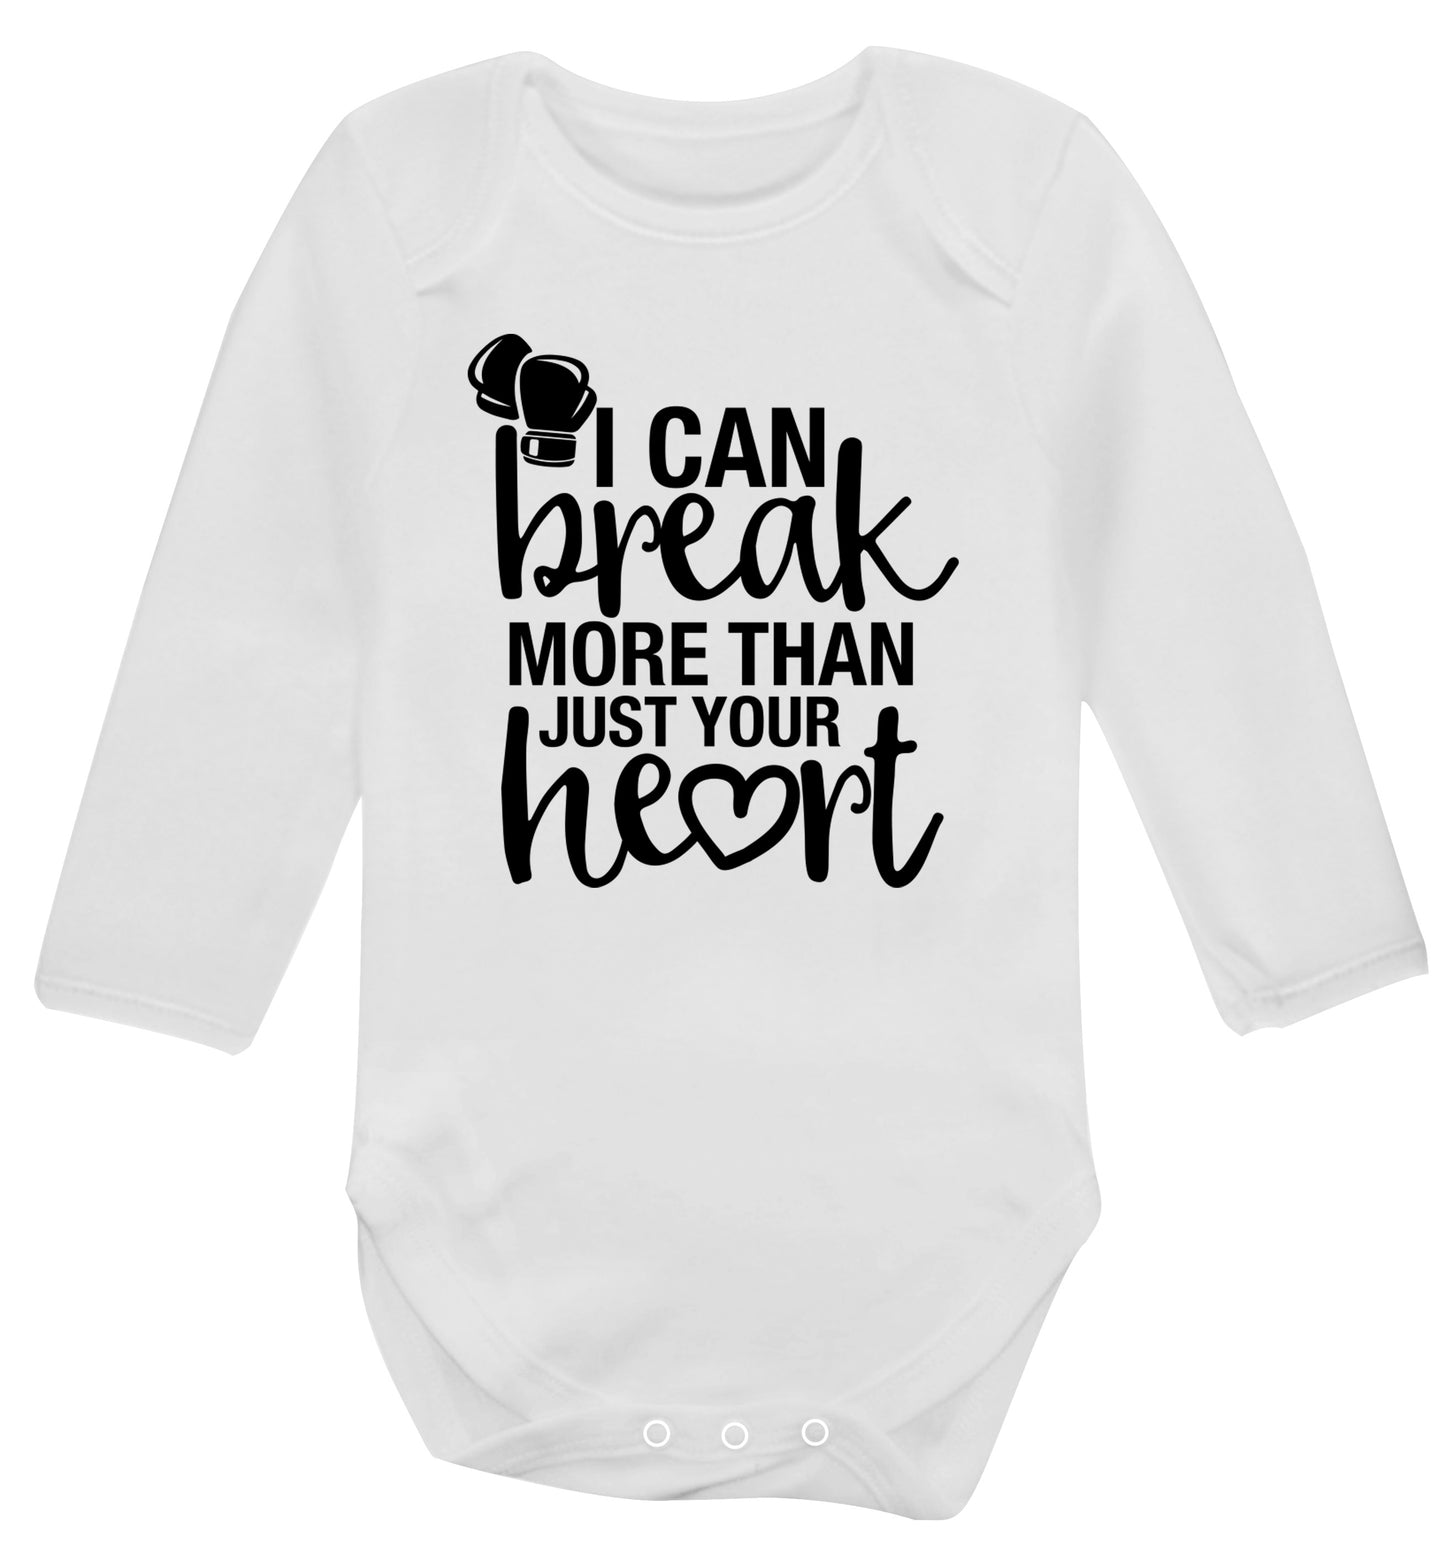 I can break more than just your heart Baby Vest long sleeved white 6-12 months